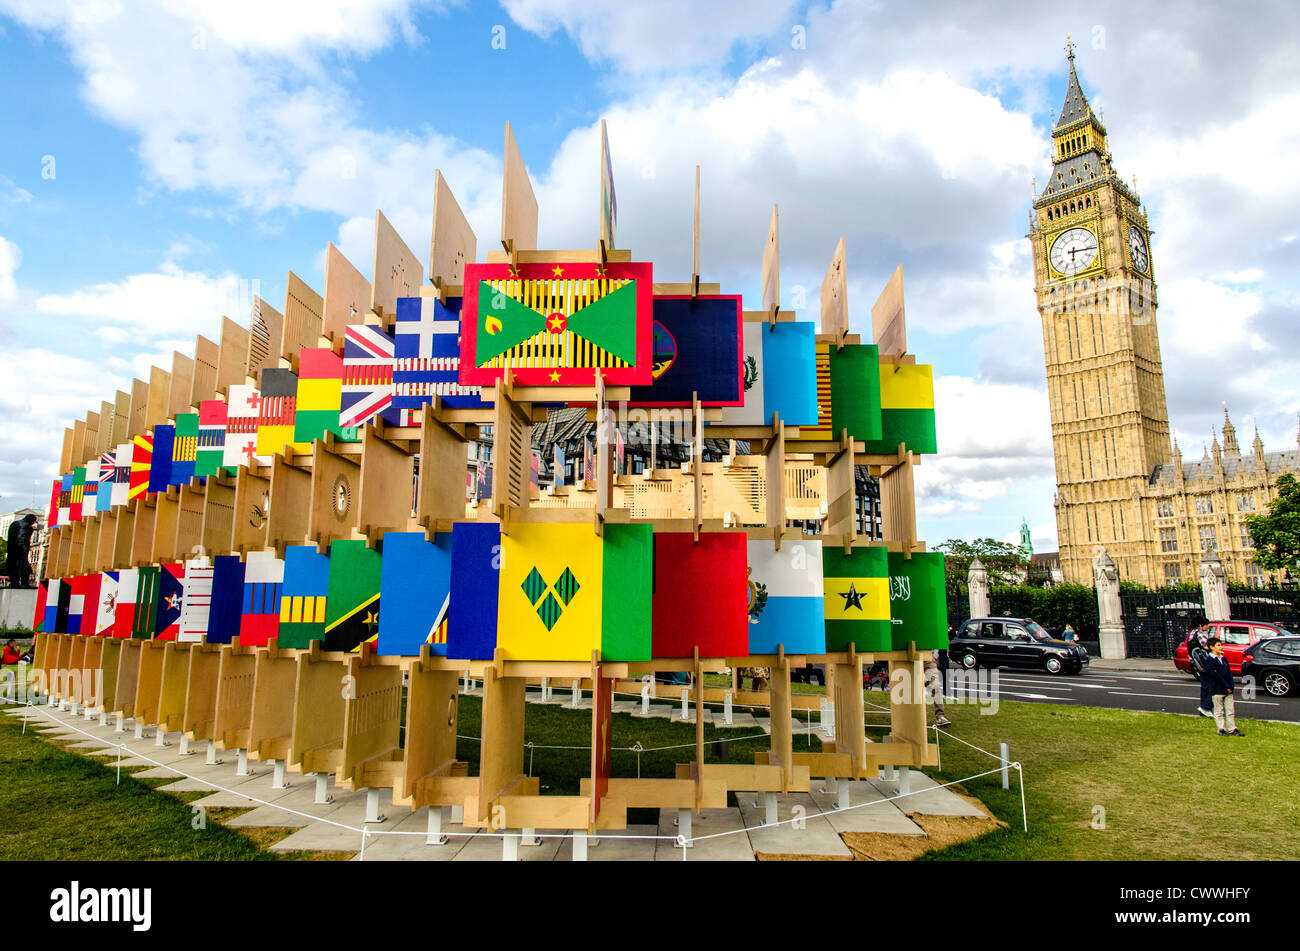 House of Flags Westminster London England Great Britain UK Stockfoto